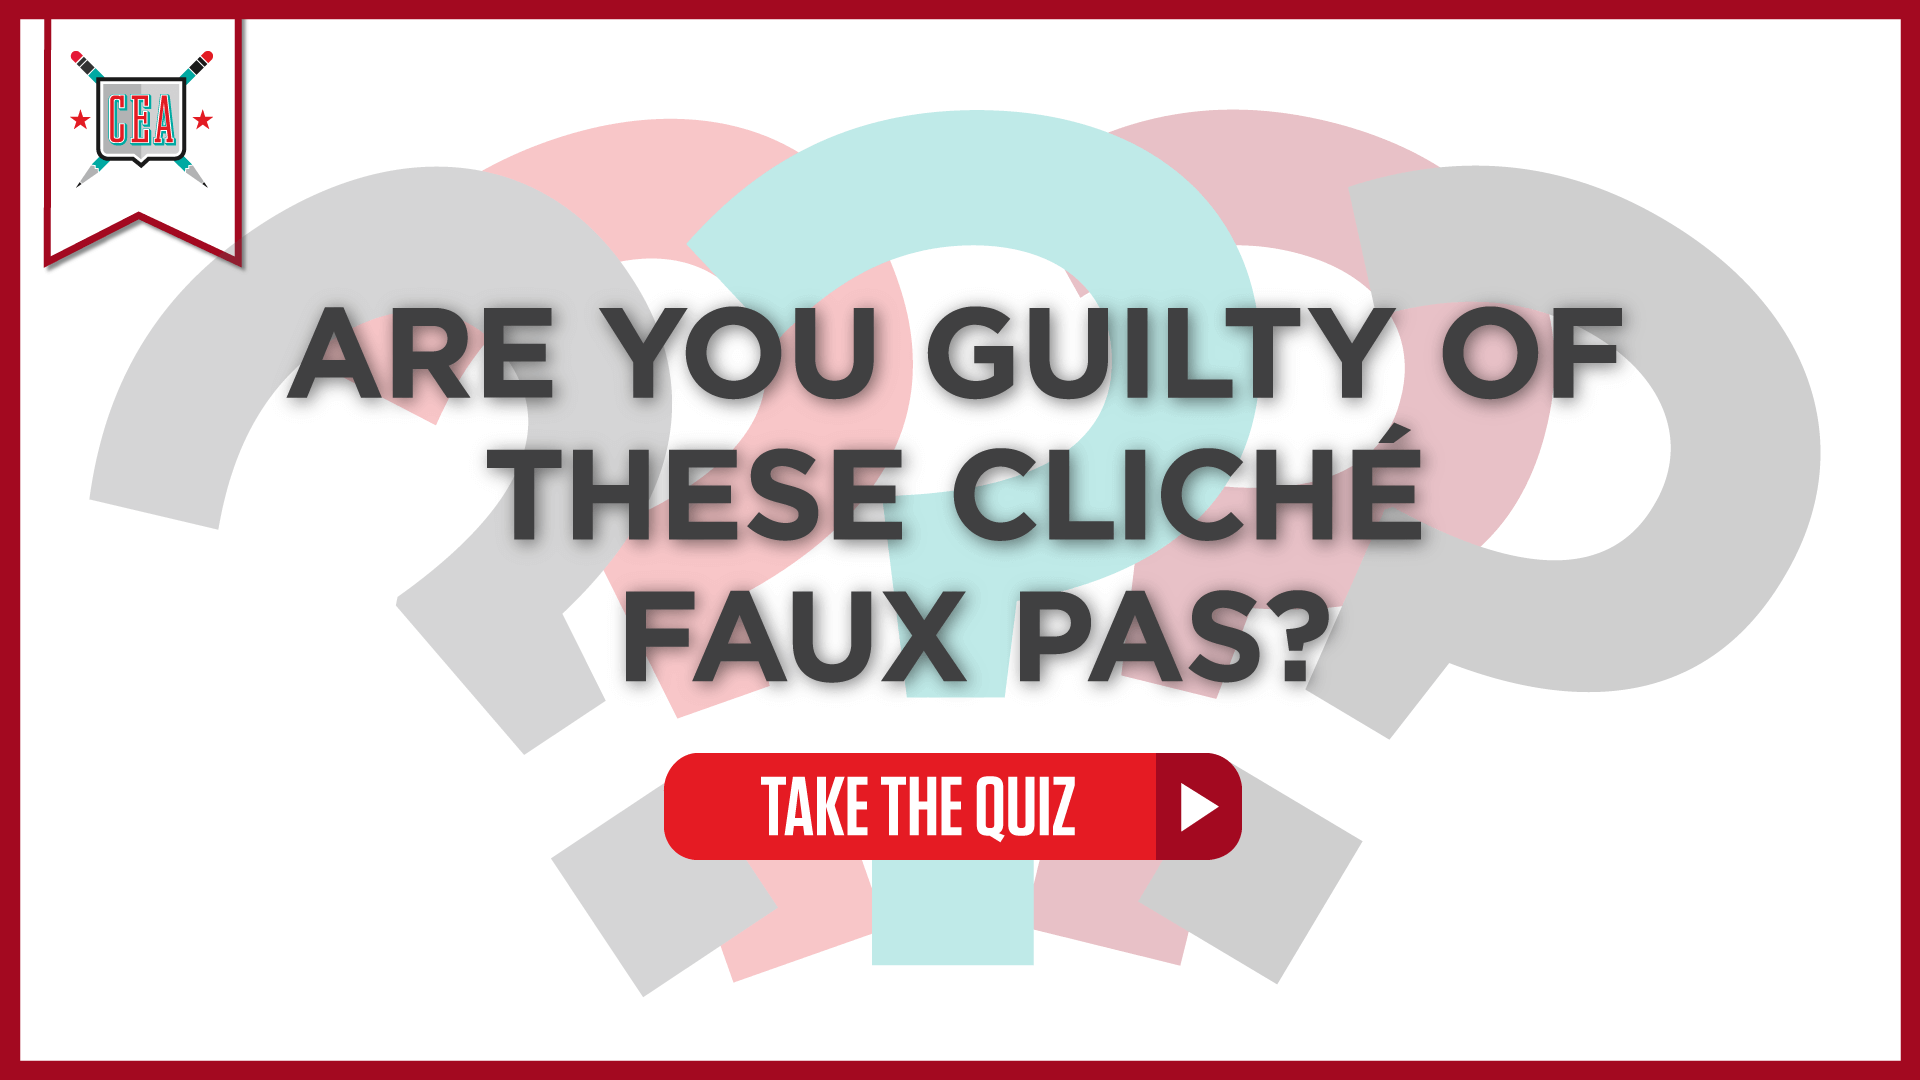 Are You Guilty of These Cliché Faux Pas? 